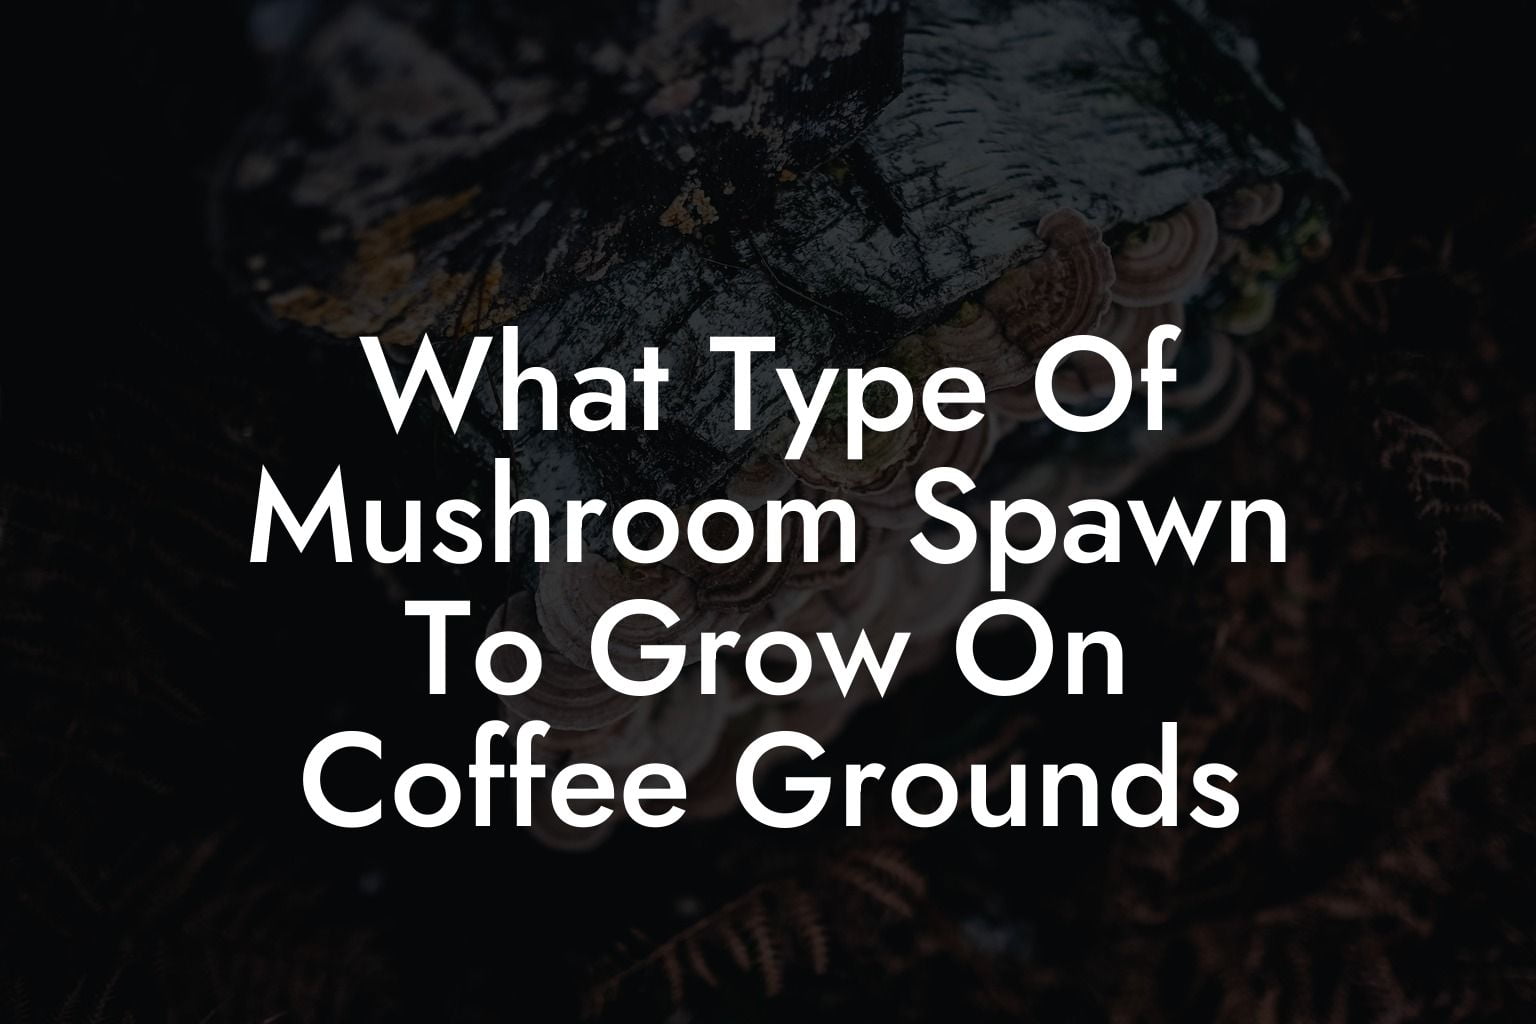 What Type Of Mushroom Spawn To Grow On Coffee Grounds